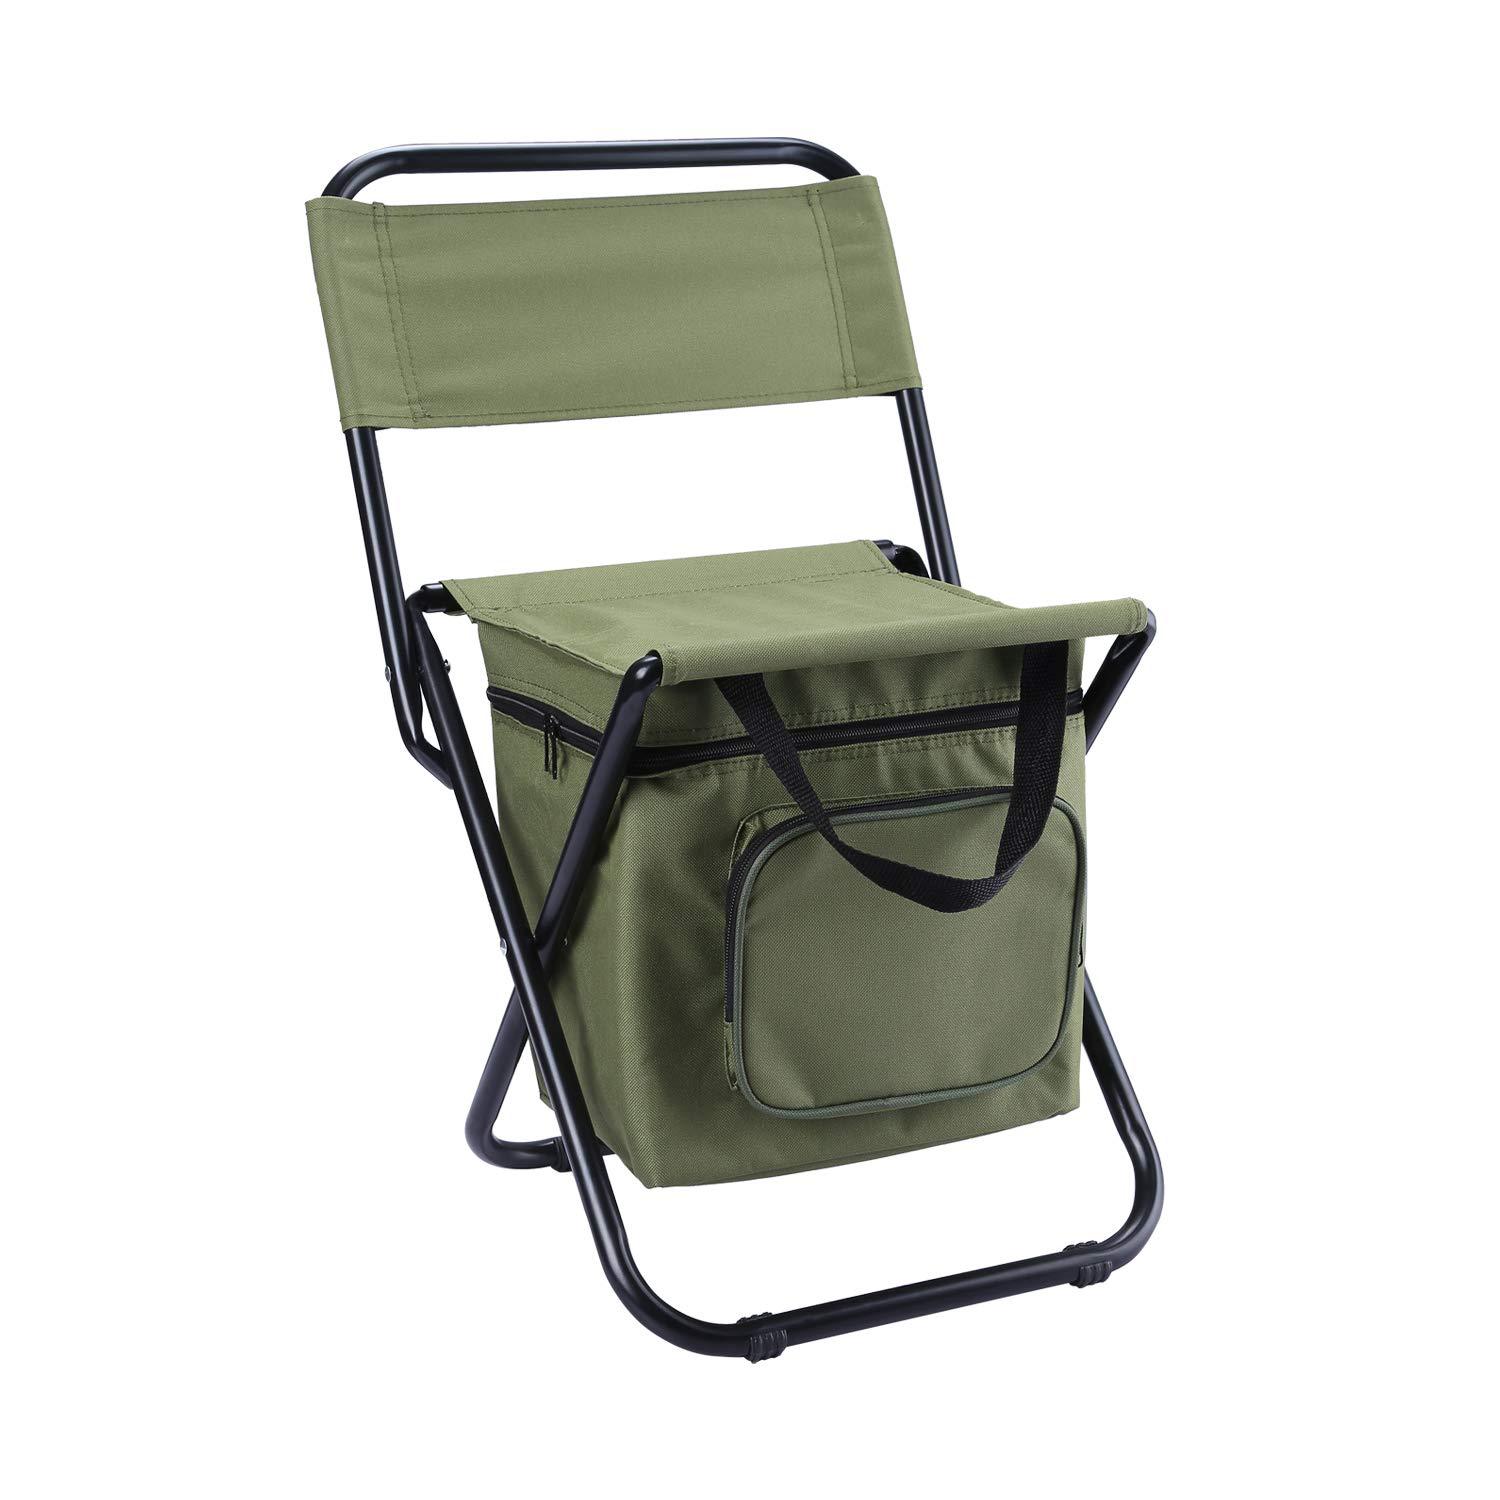 Portable Outdoor Folding Ice Bag Chair With Storage Bag With Back Insulation Function 3-in-1 Leisure Camping Fishing Chair